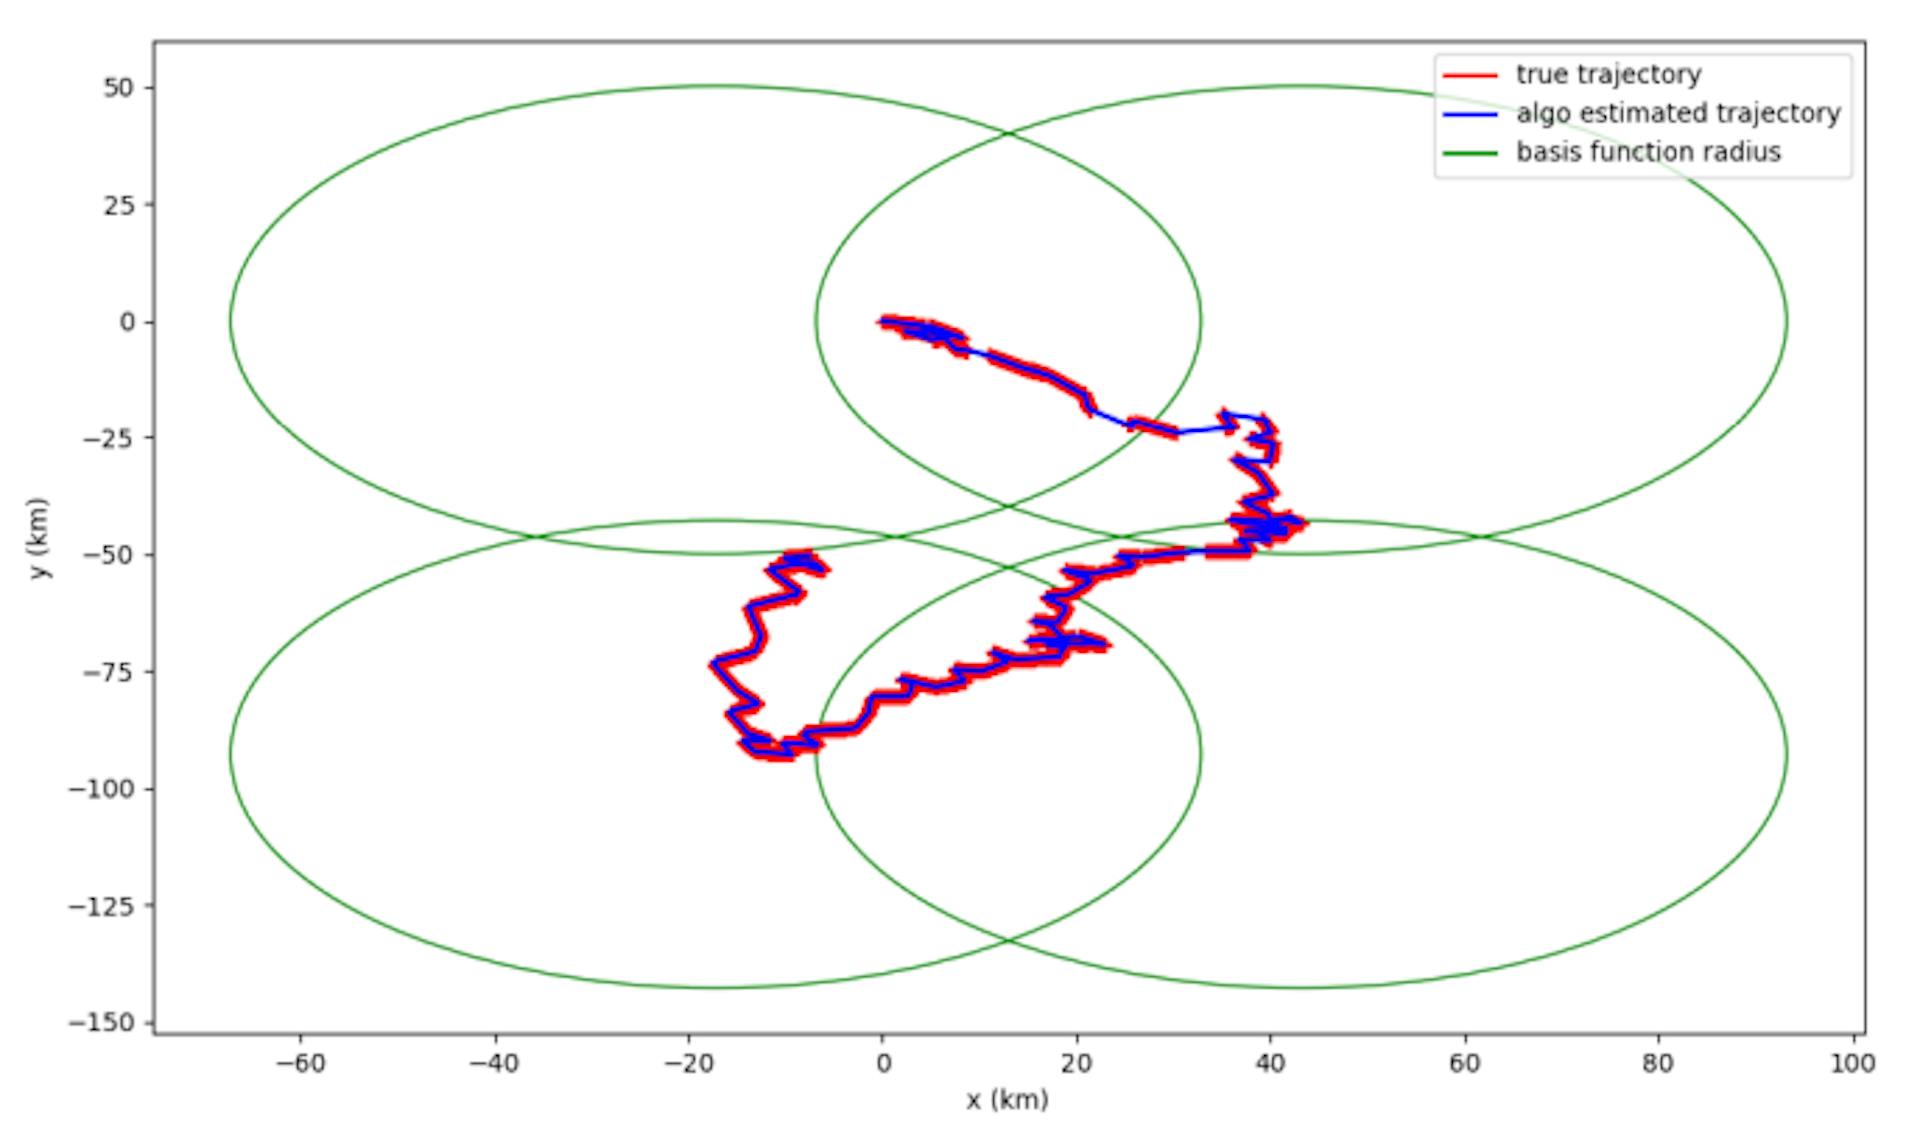 Fig. 13: Comparison of the estimated (blue) and true (red) trajectory for the 2023 USF-Sam deployment based on real-time SBD data. The four green circles are the four basis functions covering the whole trajectory.